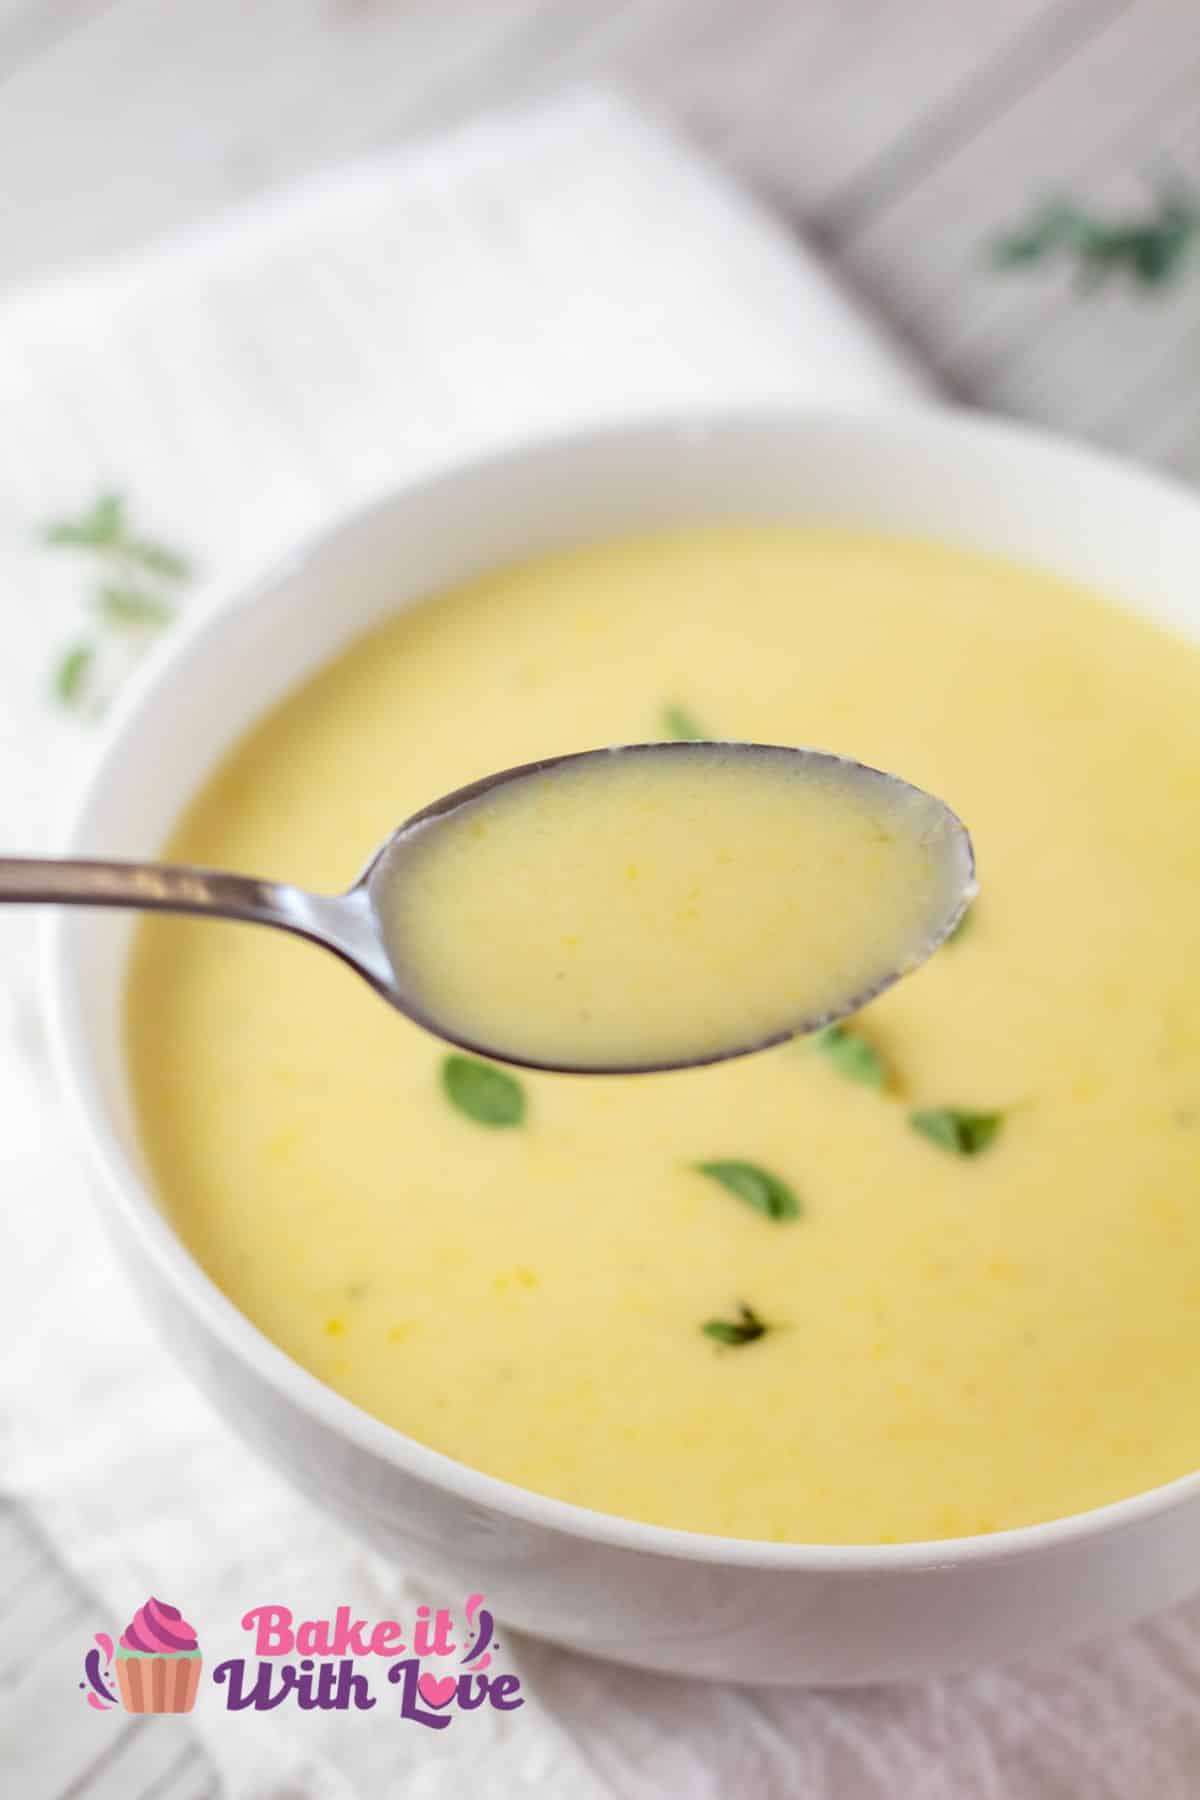 Tall image of creamy yellow squash soup in a white bowl.